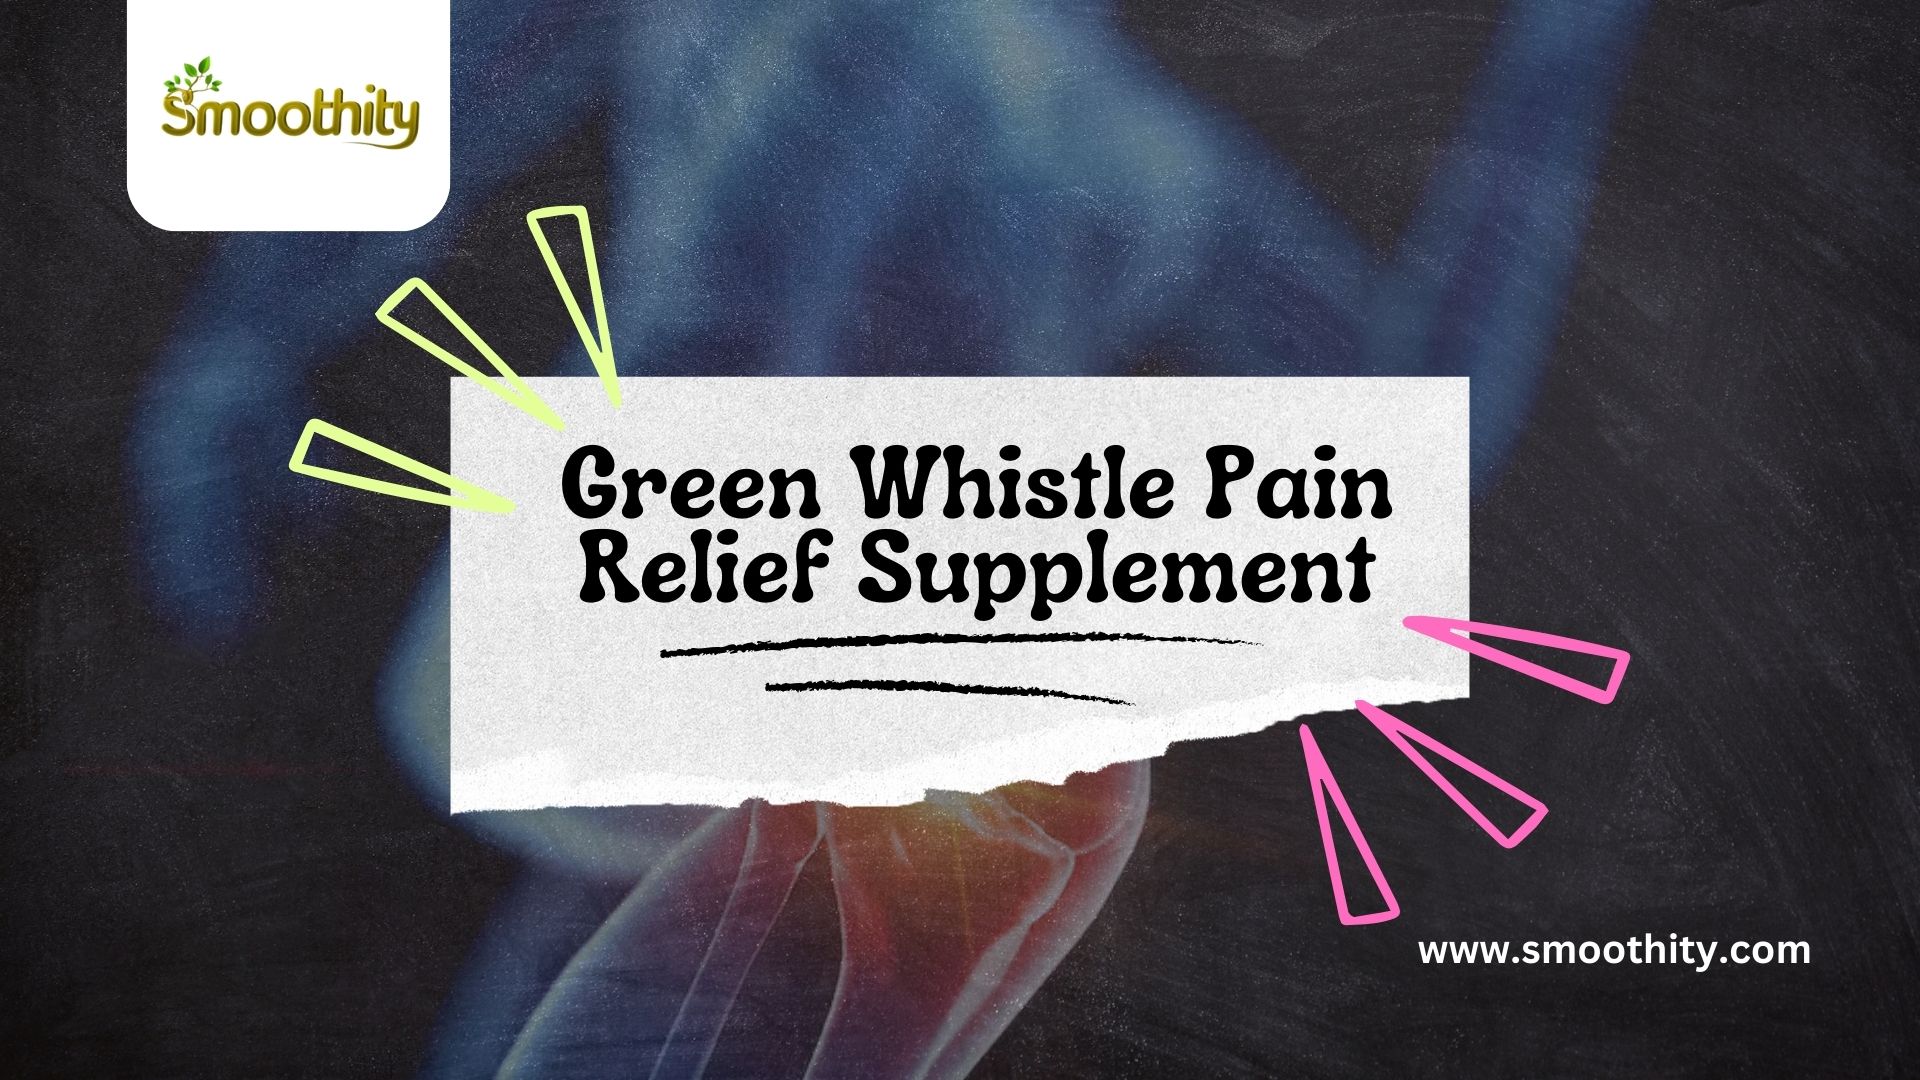 Green Whistle Pain Relief Supplement